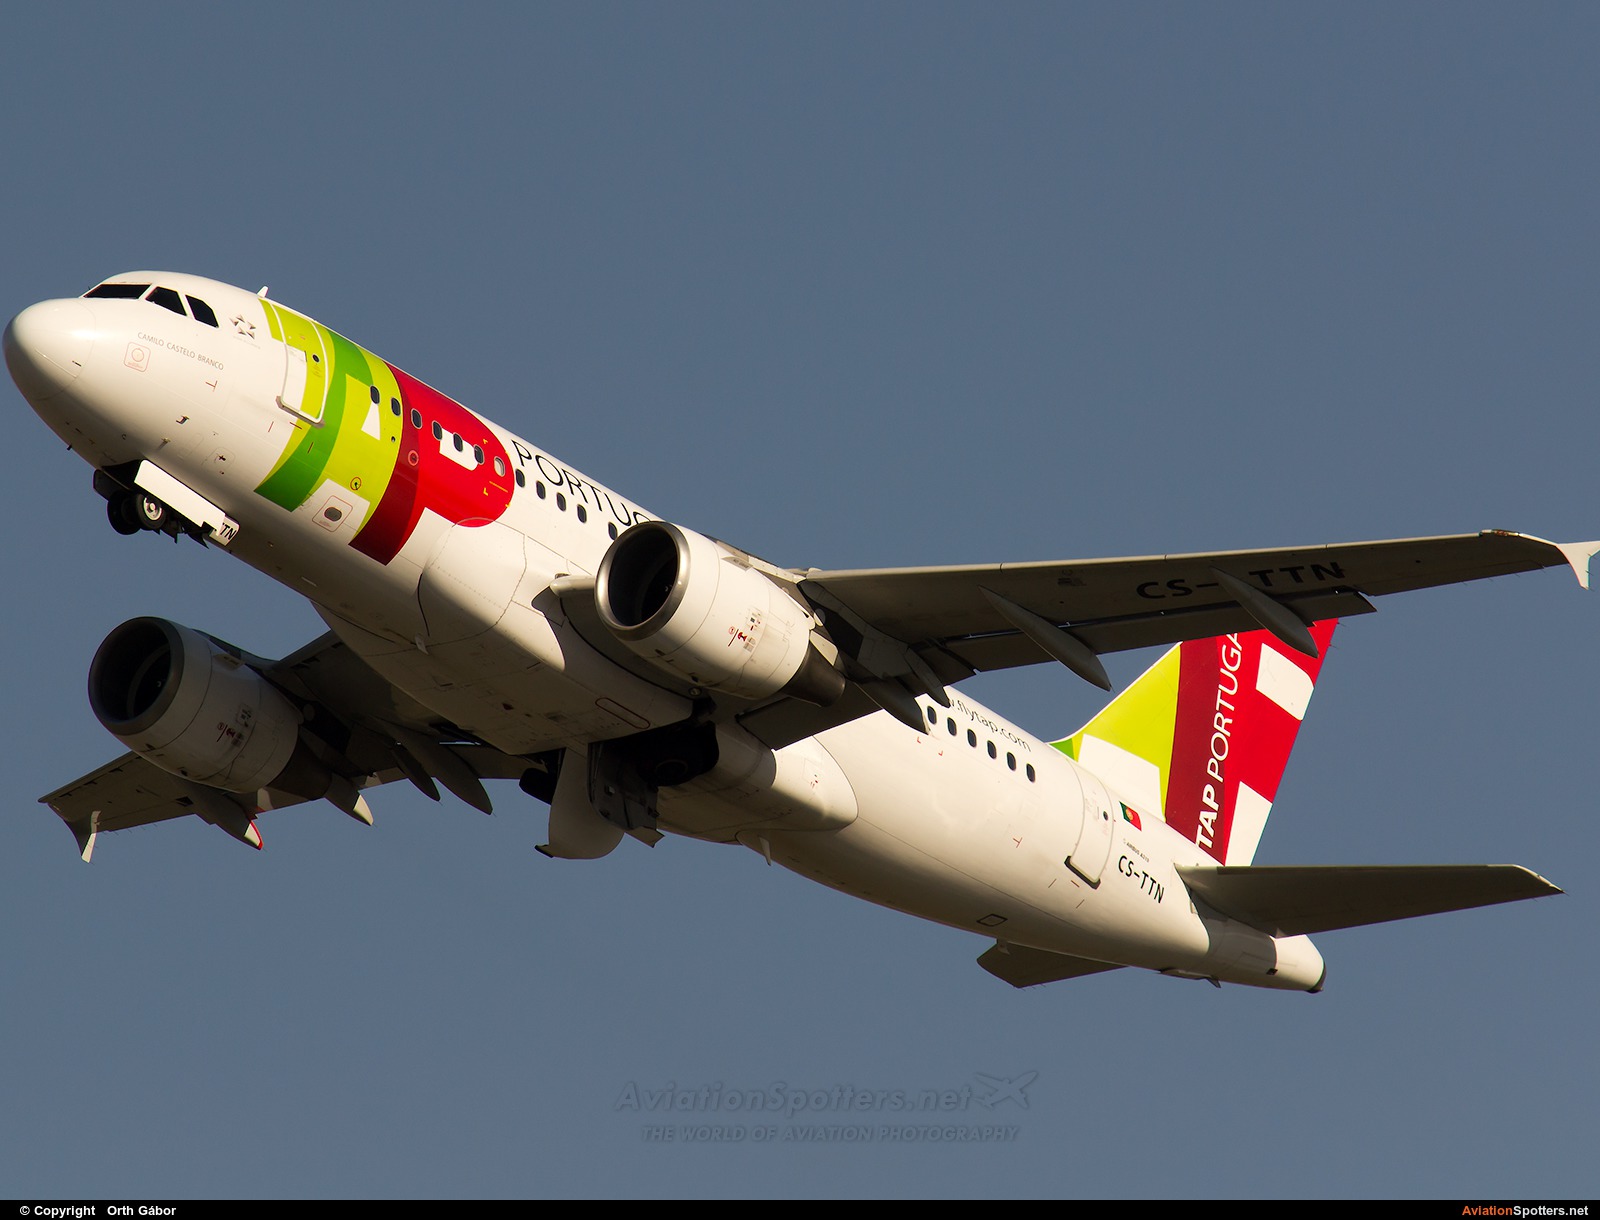 TAP Portugal  -  A319-111  (CS-TTN) By Orth Gábor (Roodkop)